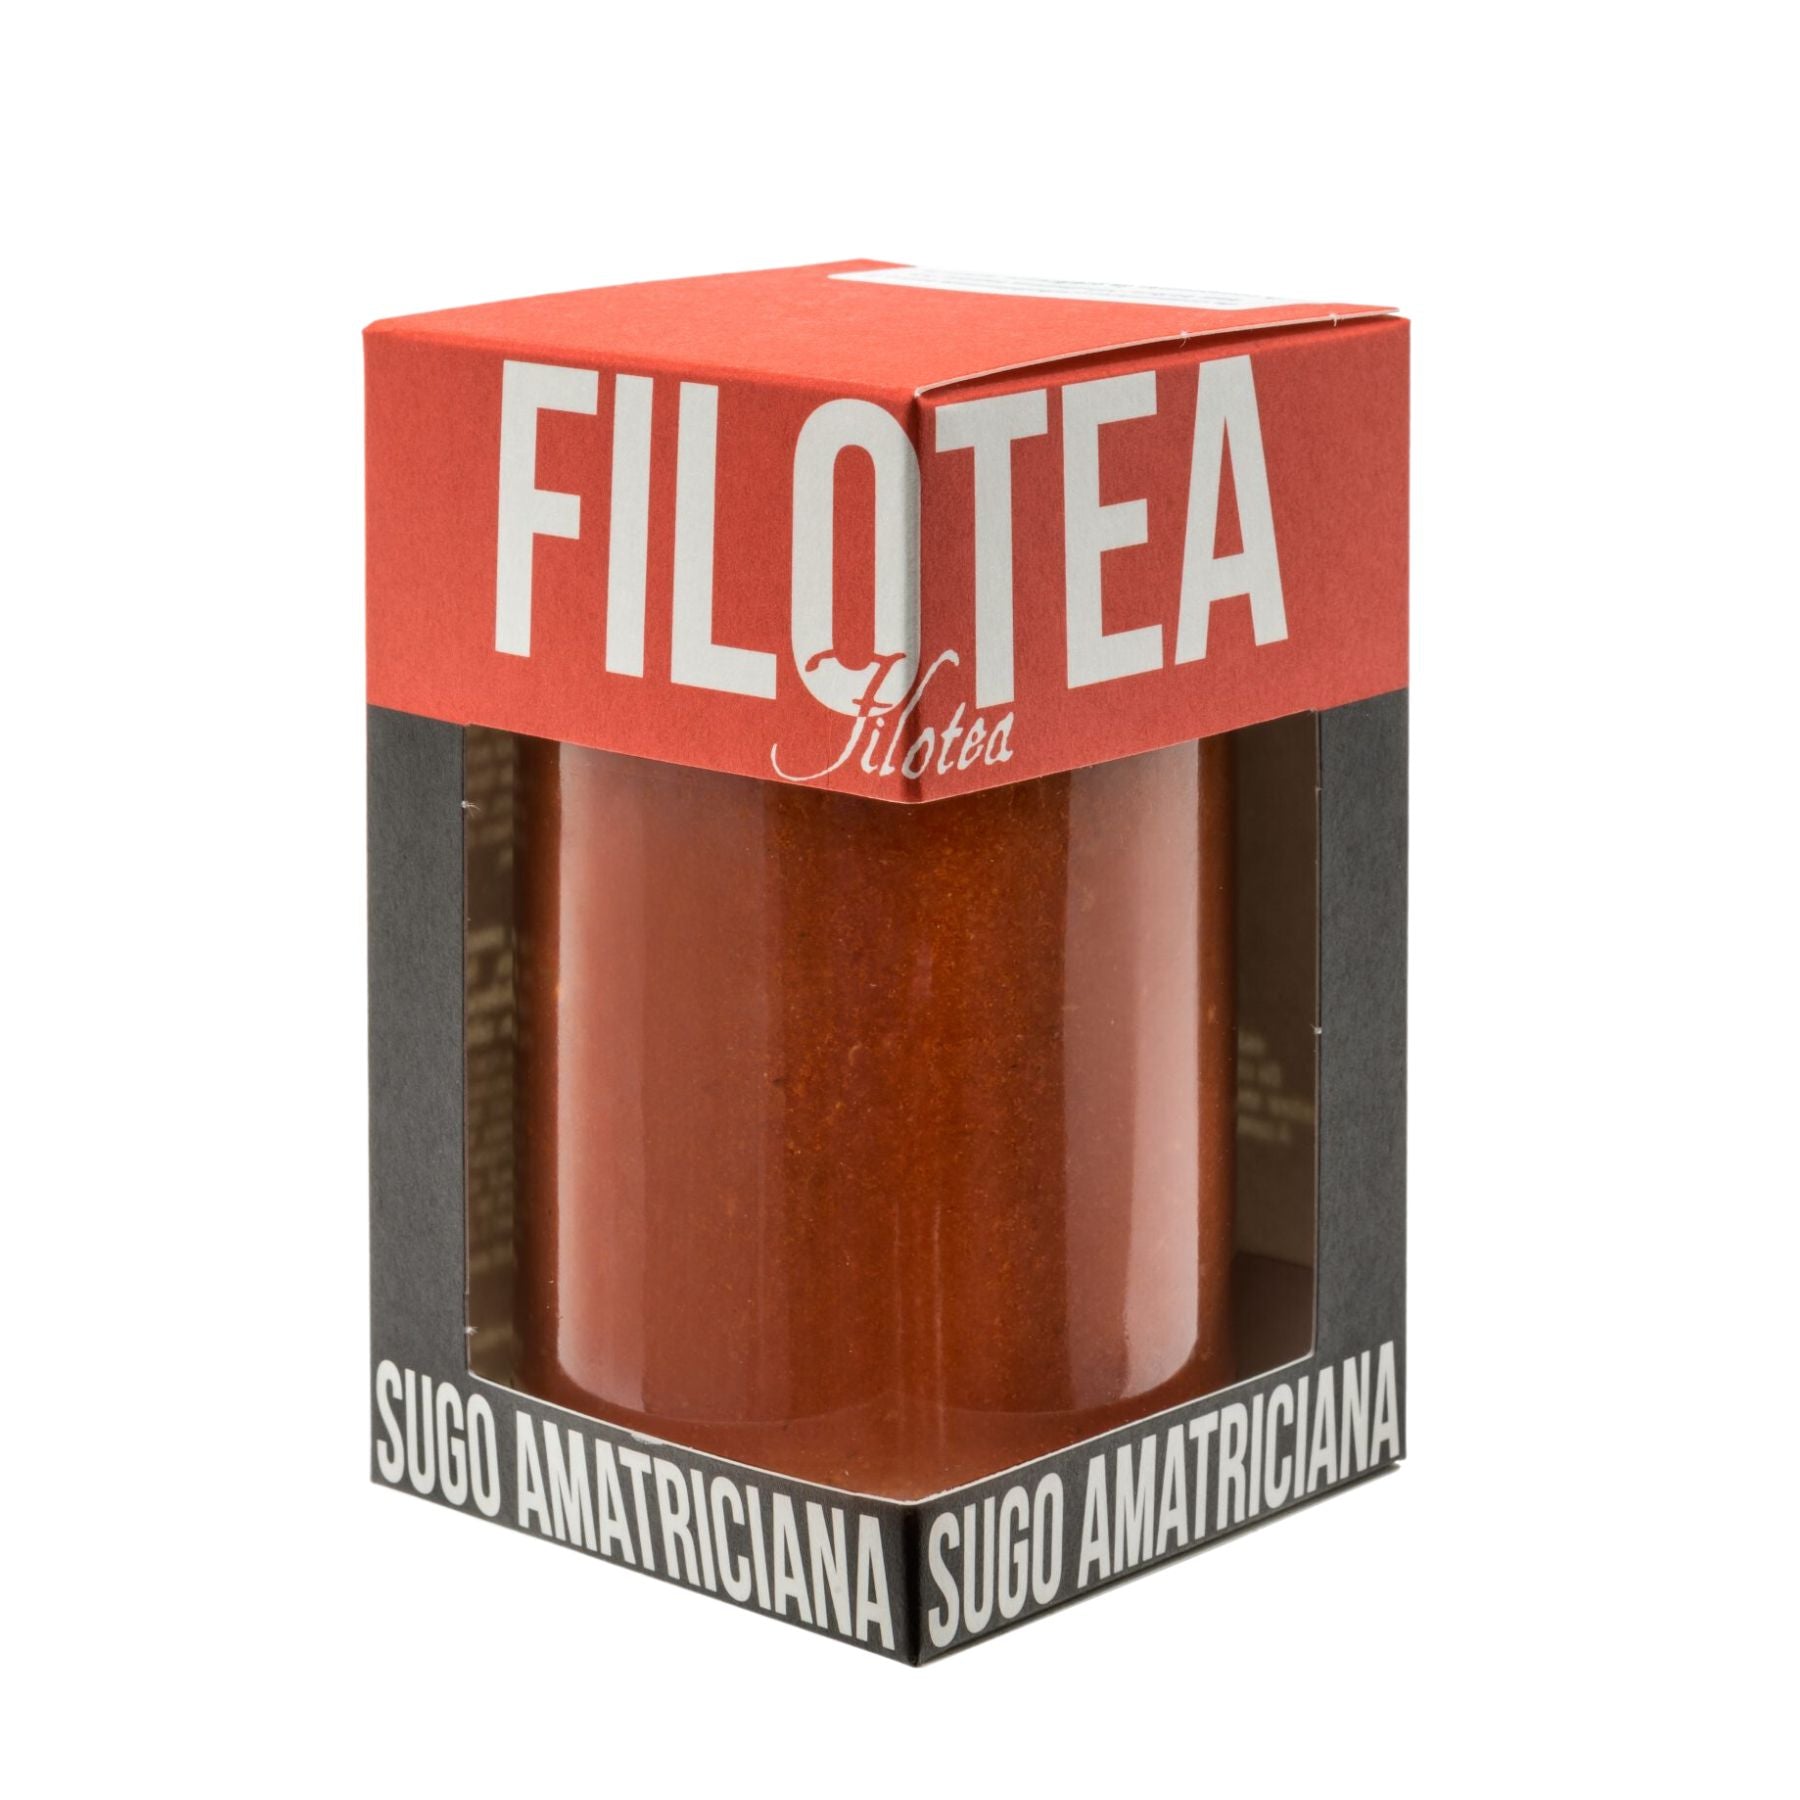 Filotea Amatriciana Pasta Sauce 280g | Imported and distributed in the UK by Just Gourmet Foods